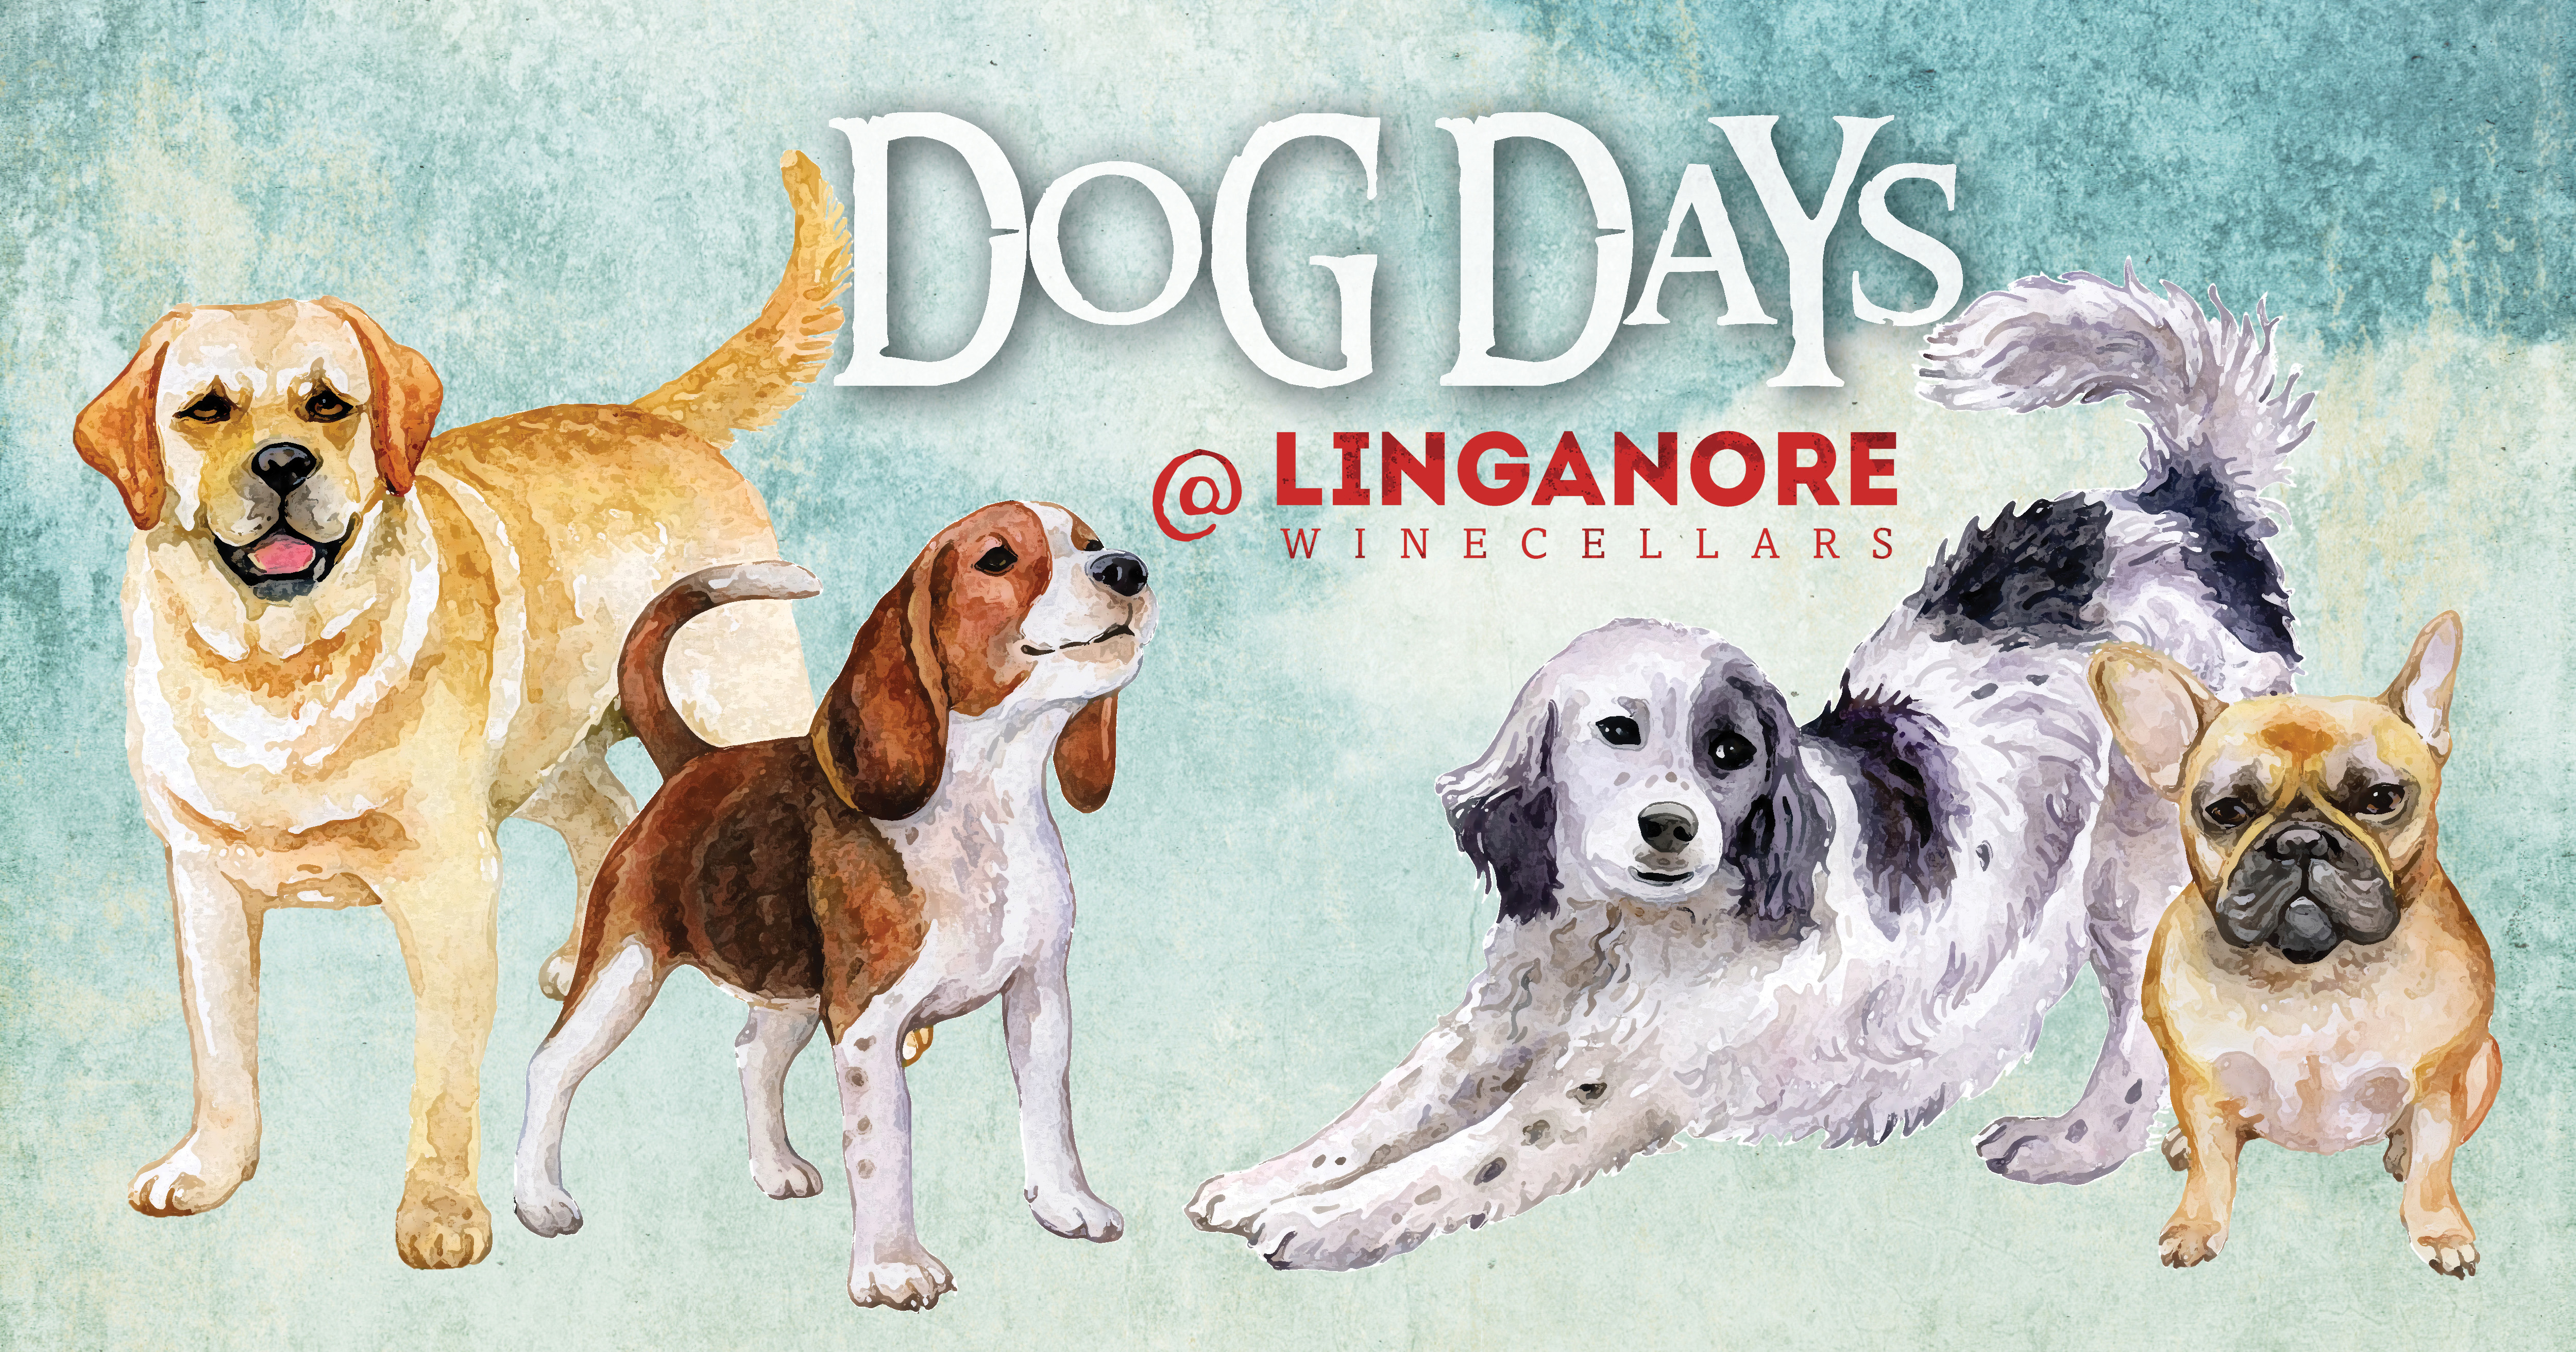 Dog Days at linganore image of dogs